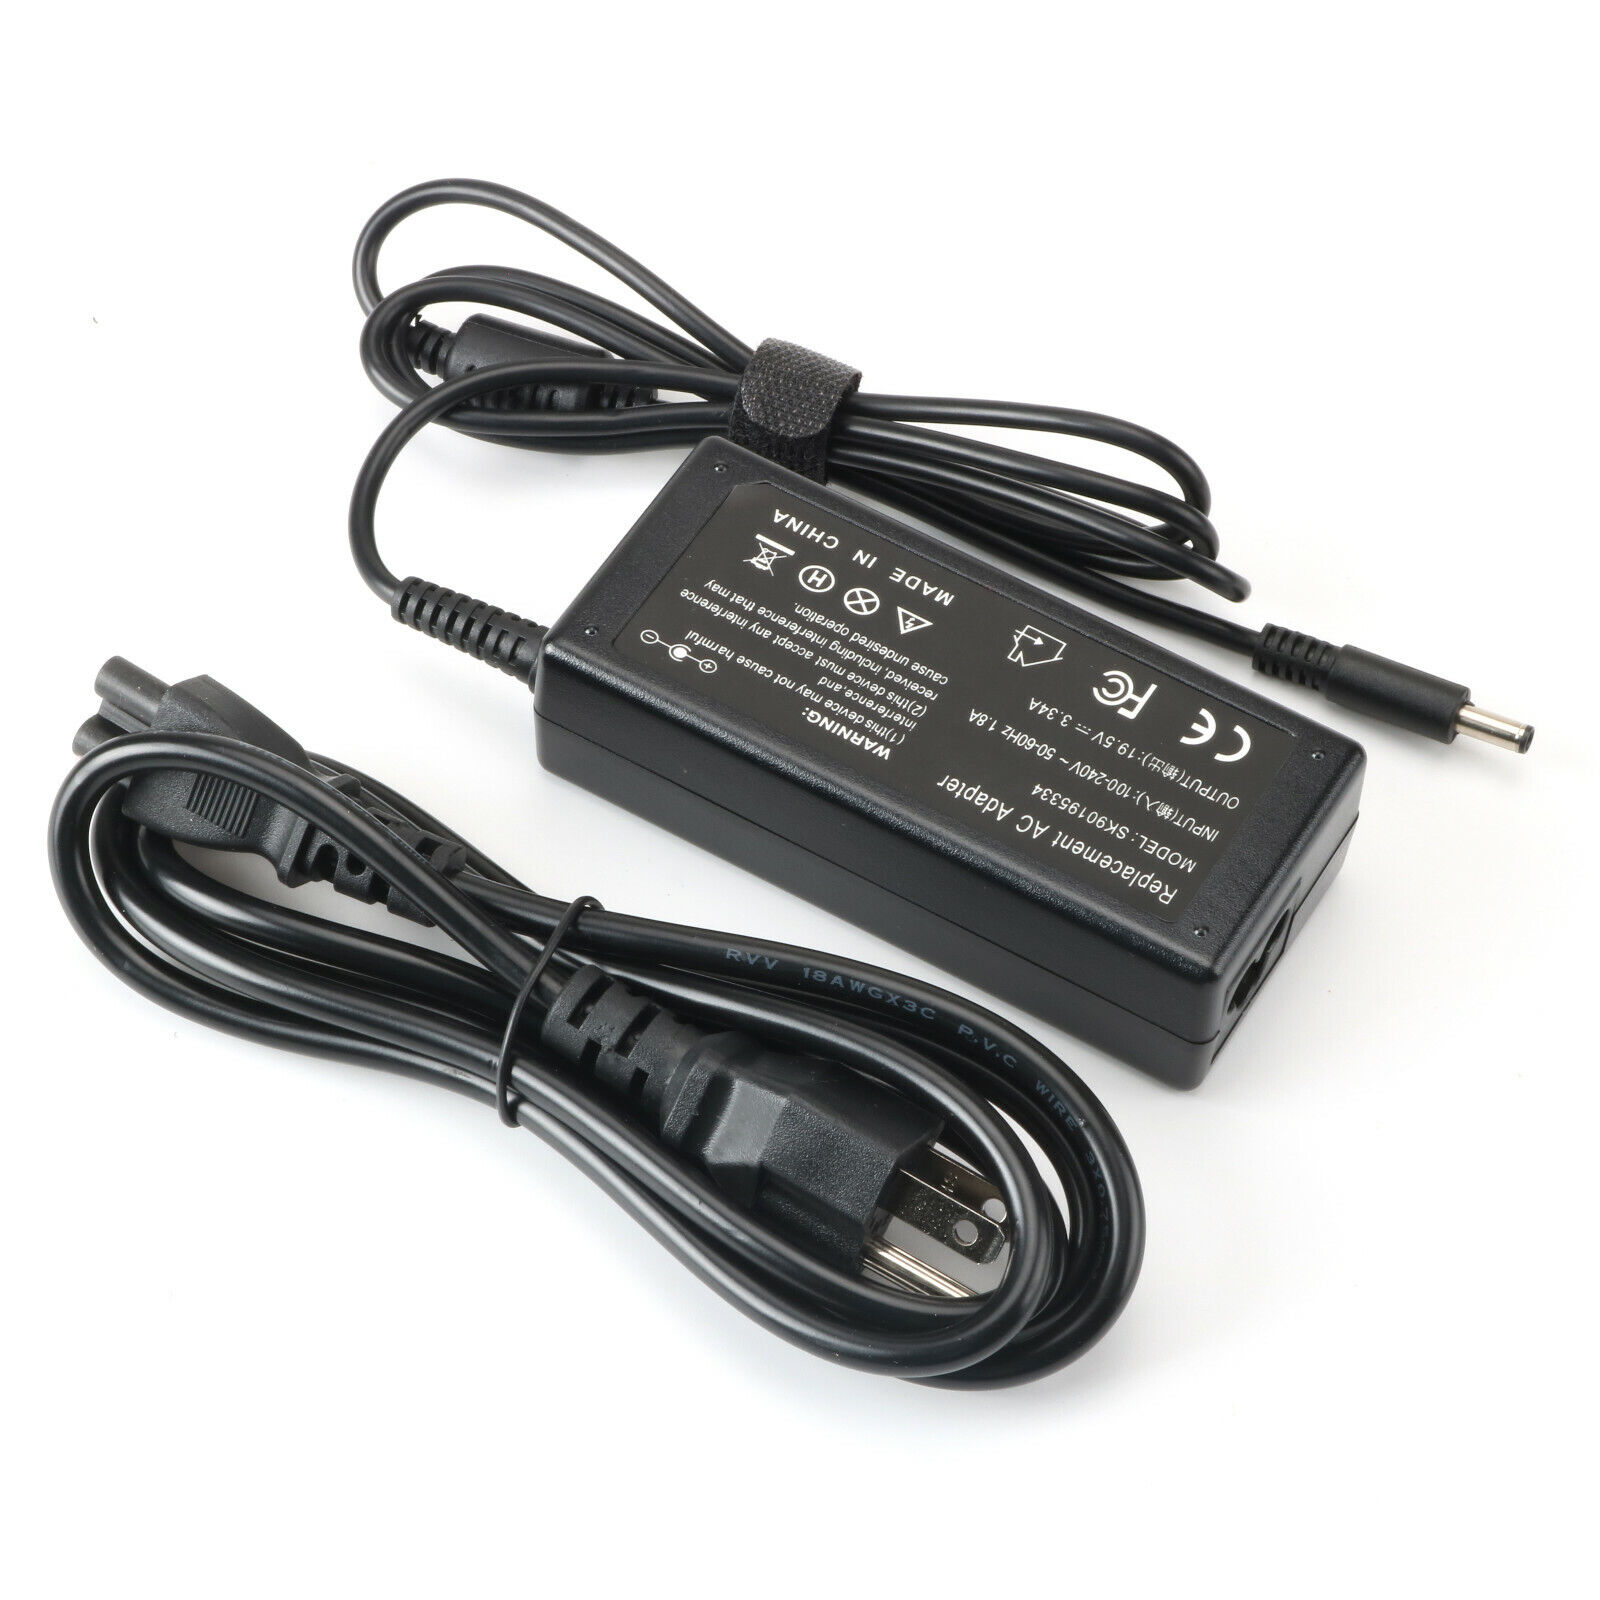 Laptop Charger for Dell Inspiron 5559 5558 5555 3552 Power Adapter Supply 19.5V 